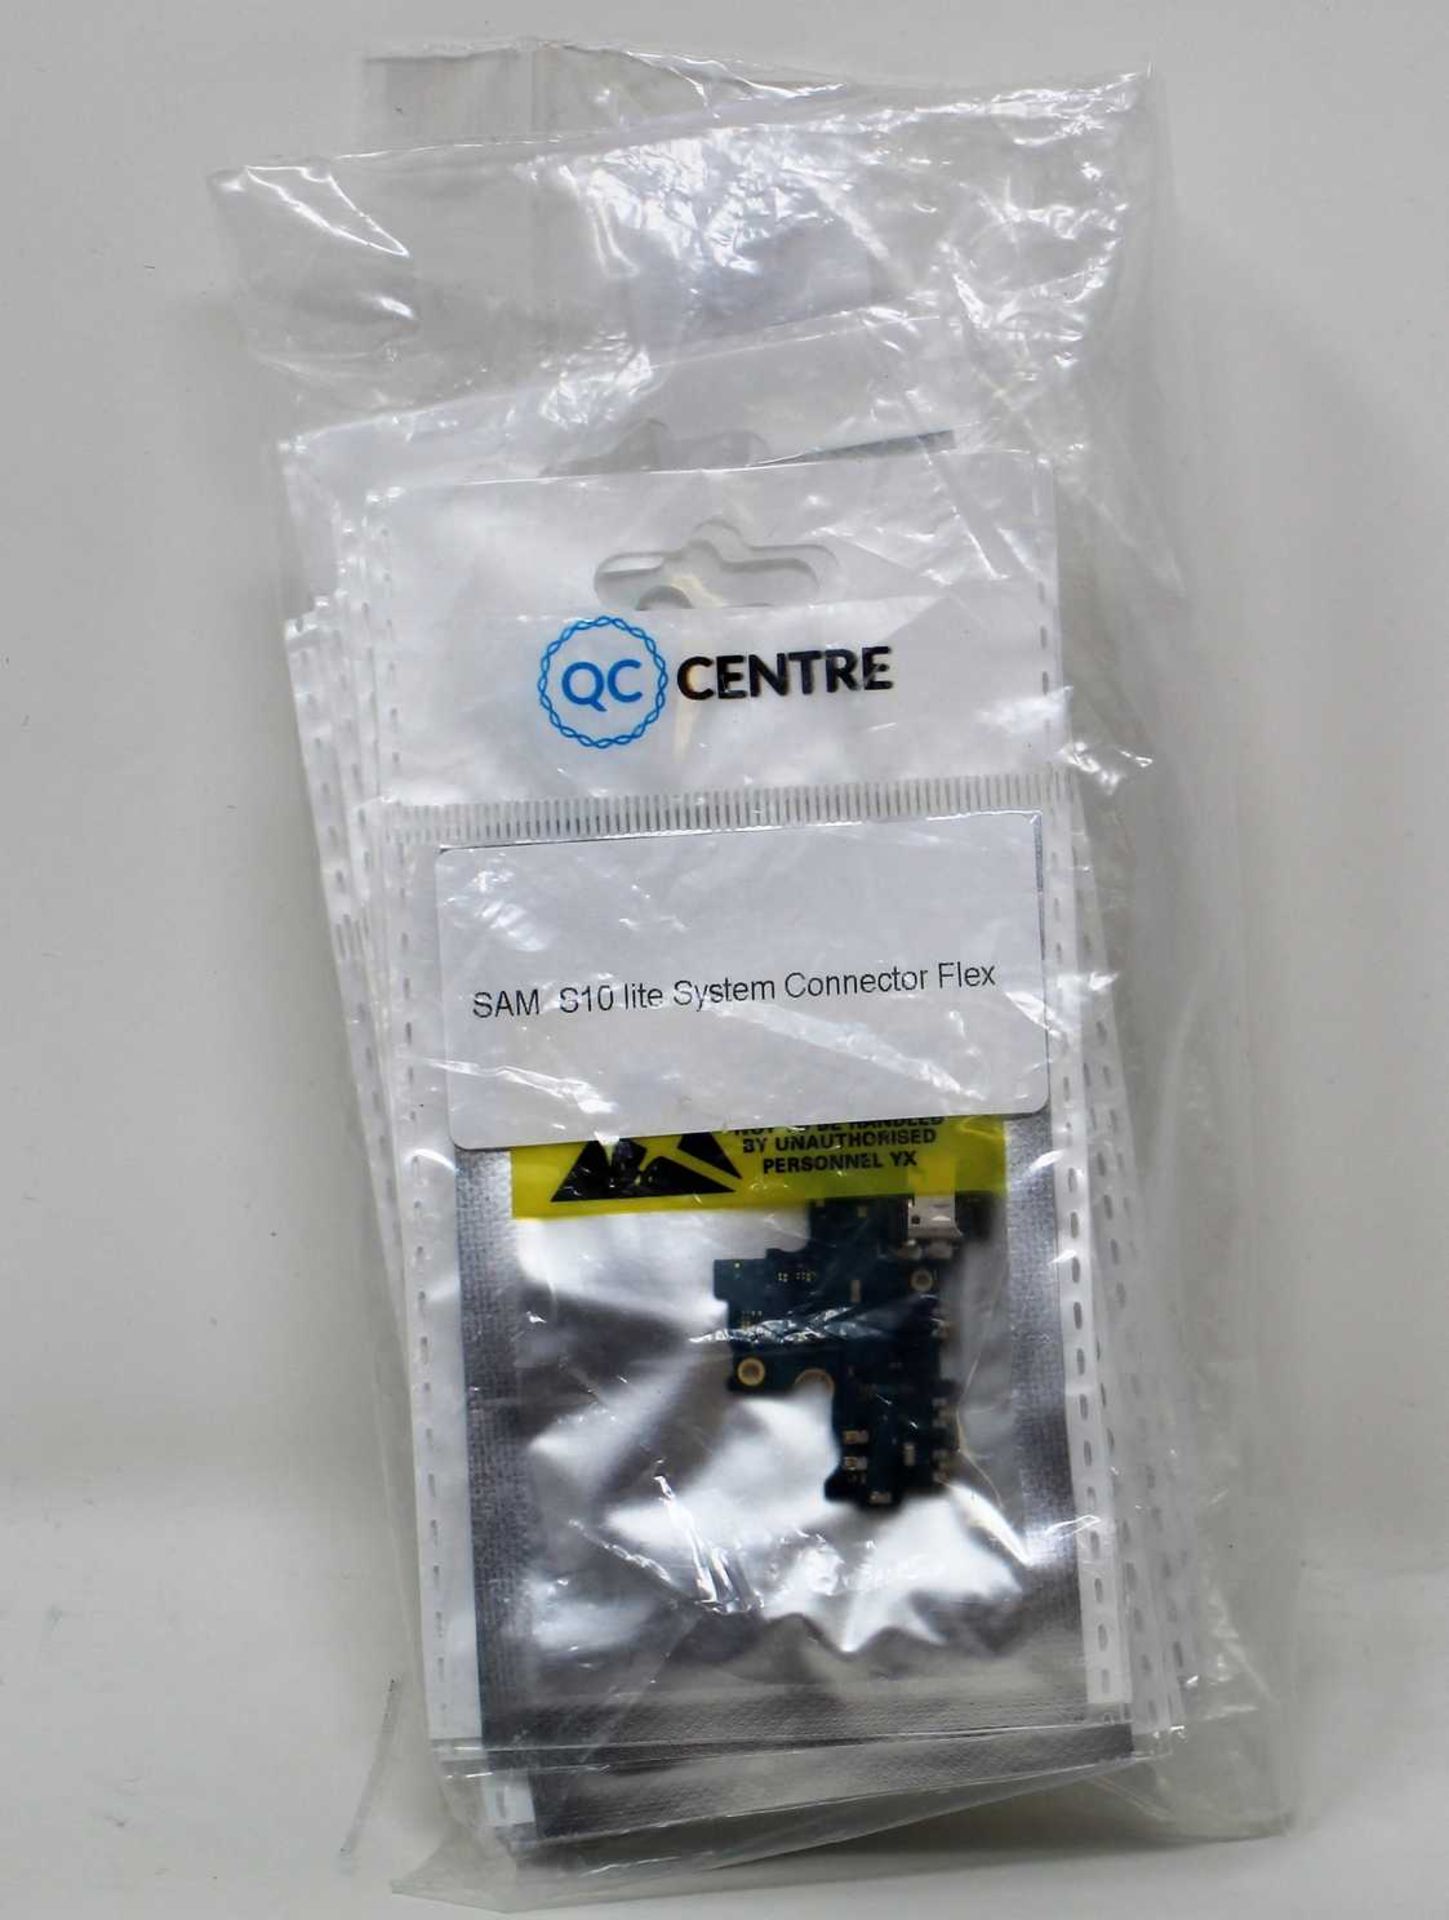 Ten as new QC Centre replacement connector flex boards for Samsung S10 Lite (Packaging sealed).